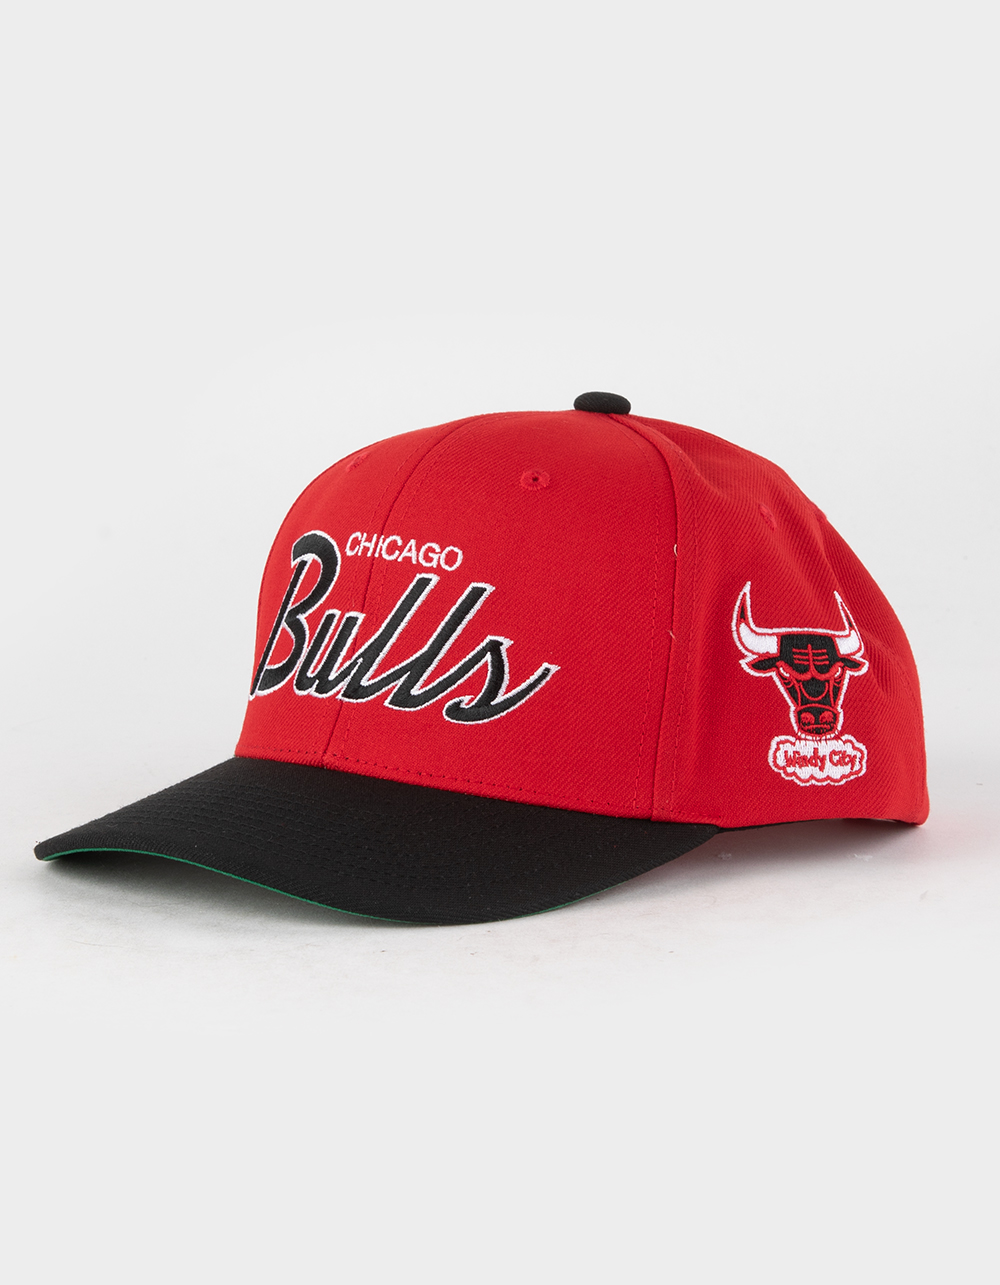 Mitchell & Ness Team Script 2.0 Chicago Bulls Snapback Hat - Red - One Size